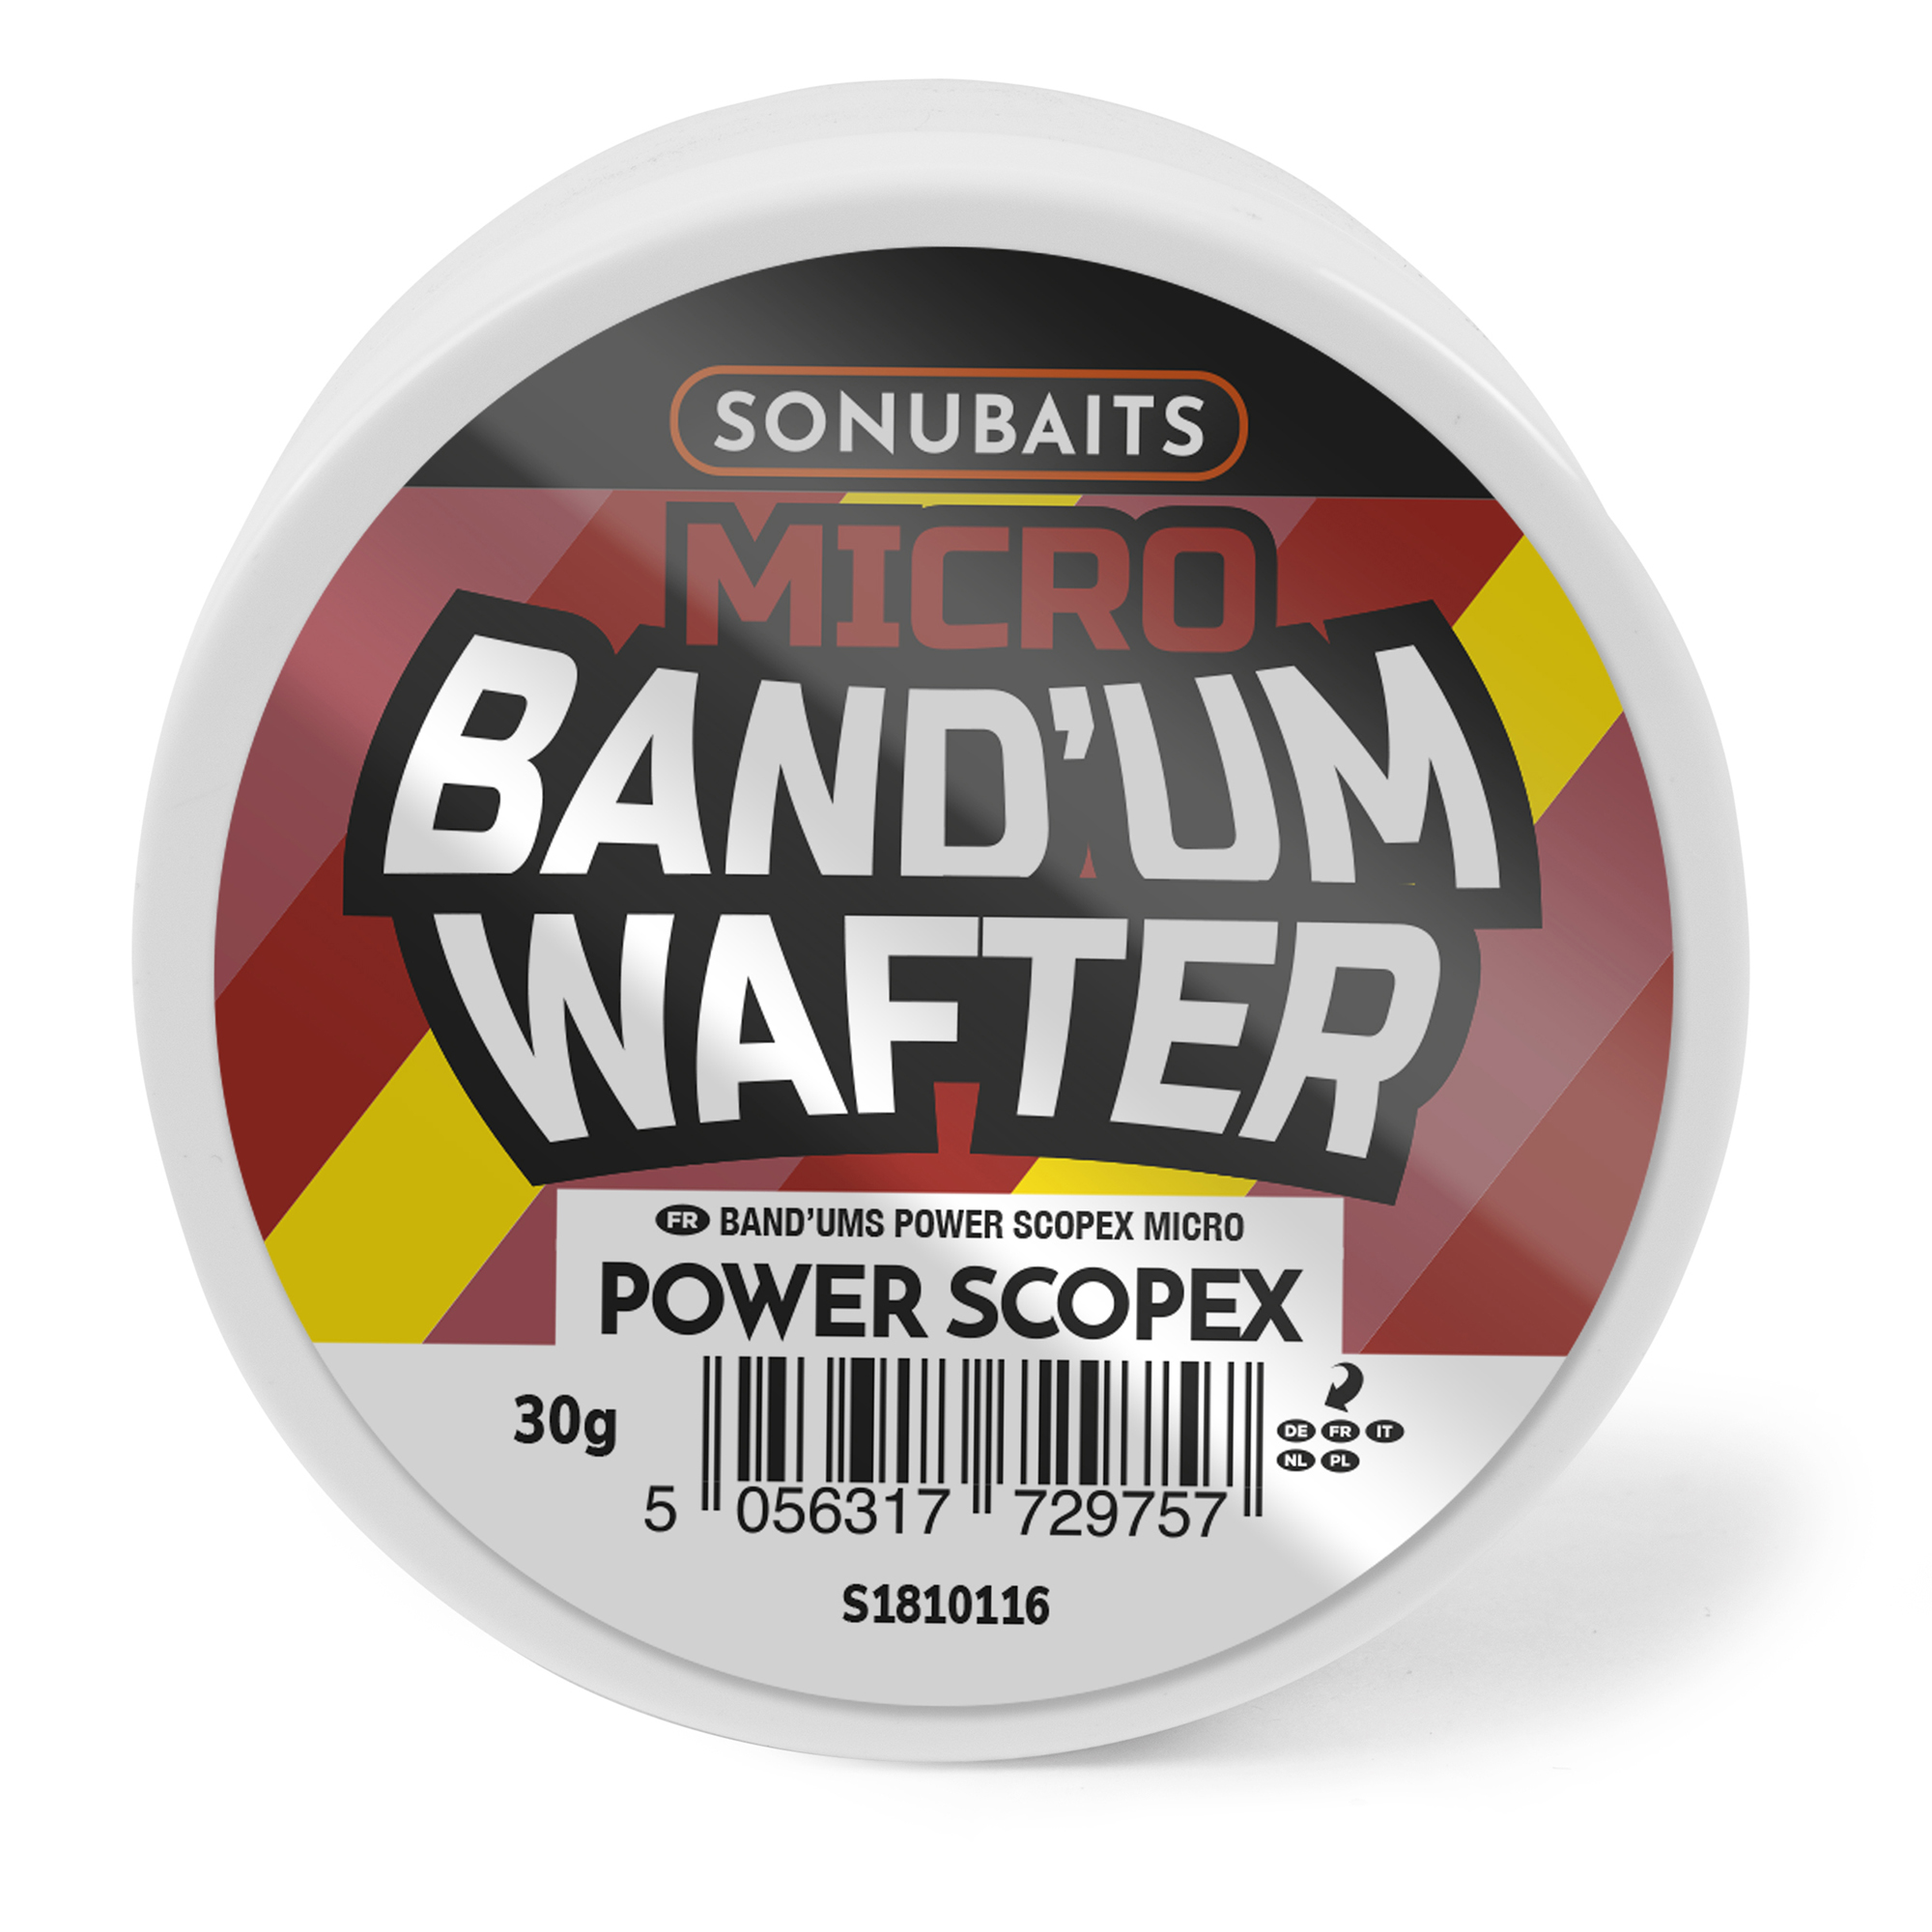 Sonubaits Micro Band'Um Wafter - Power Scopex